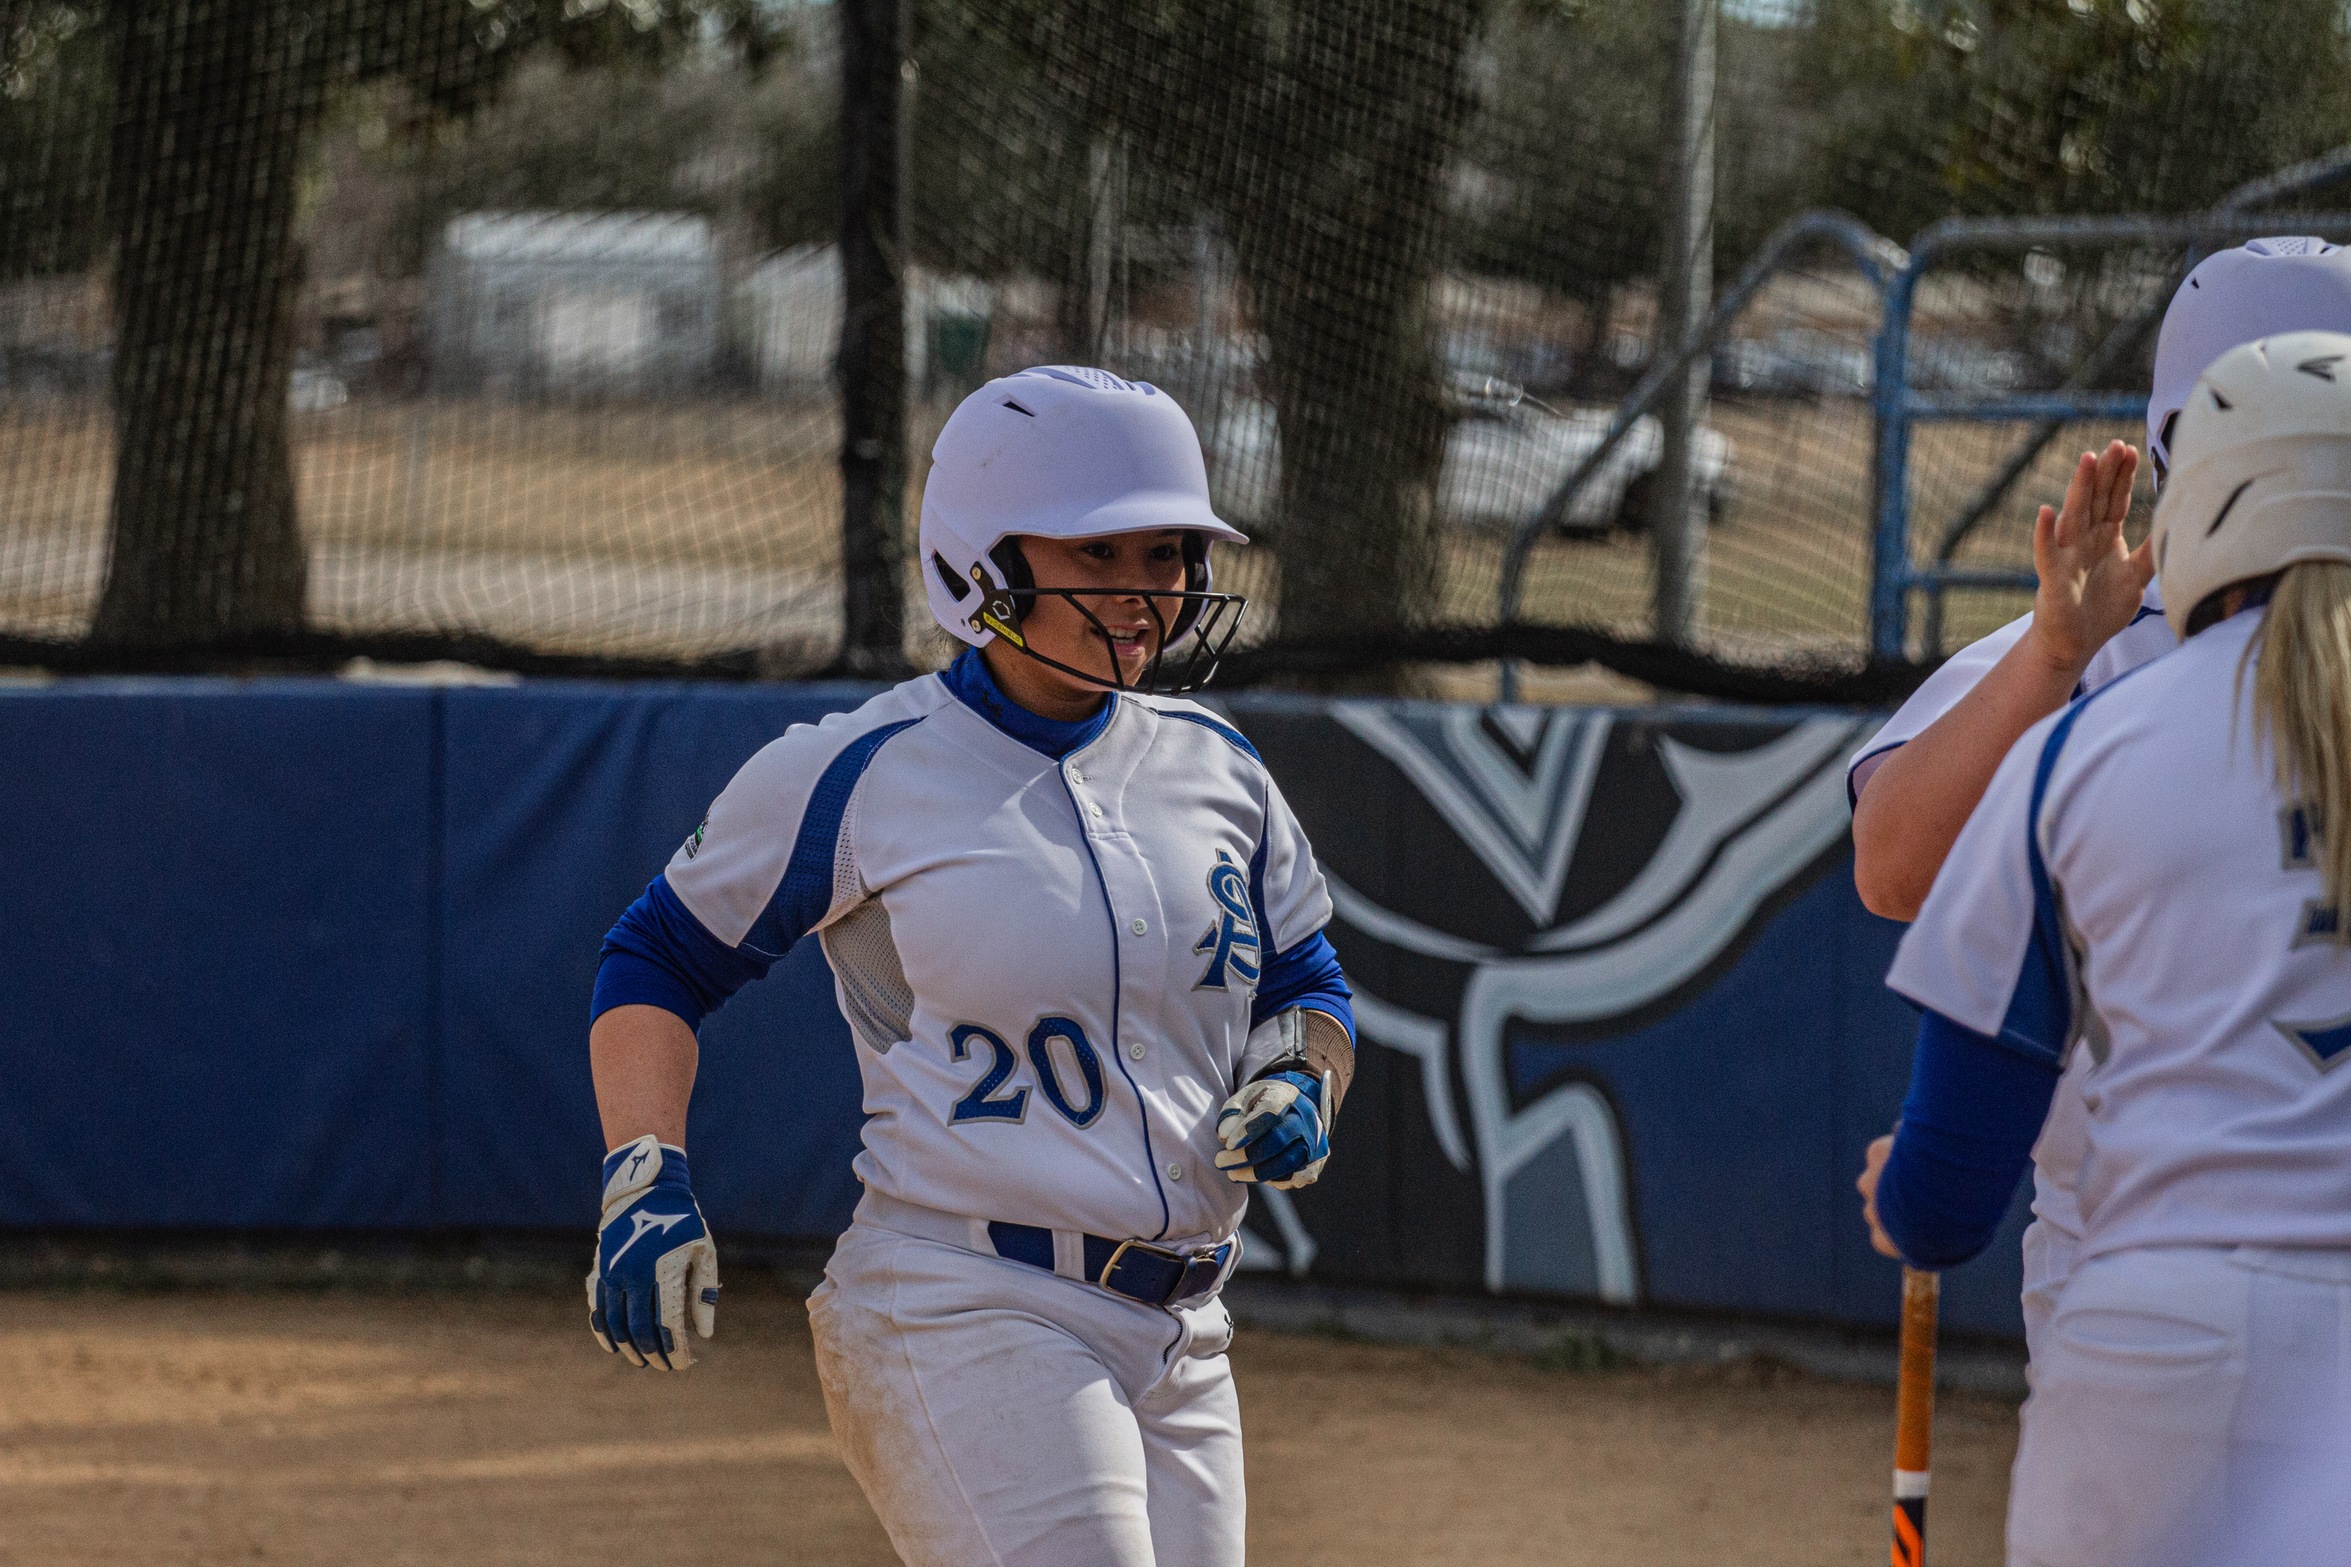 Knights softball drops back-to-back games against Columbia International University at home